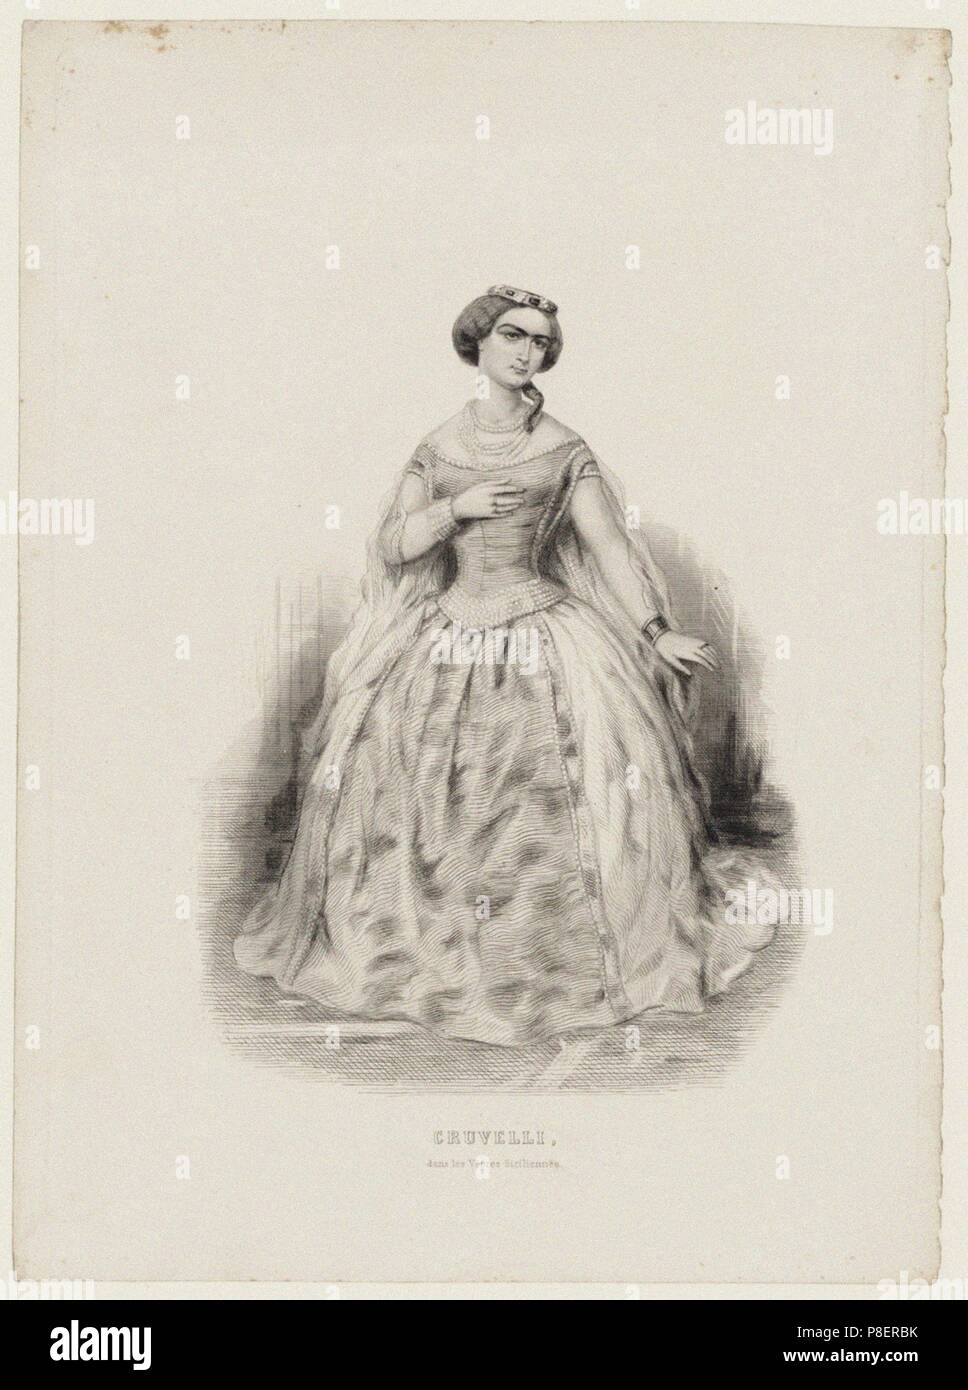 Sophie Cruvelli (1826-1907) in Opera Les Vêpres siciliennes by Giuseppe Verdi. Museum: PRIVATE COLLECTION. Stock Photo